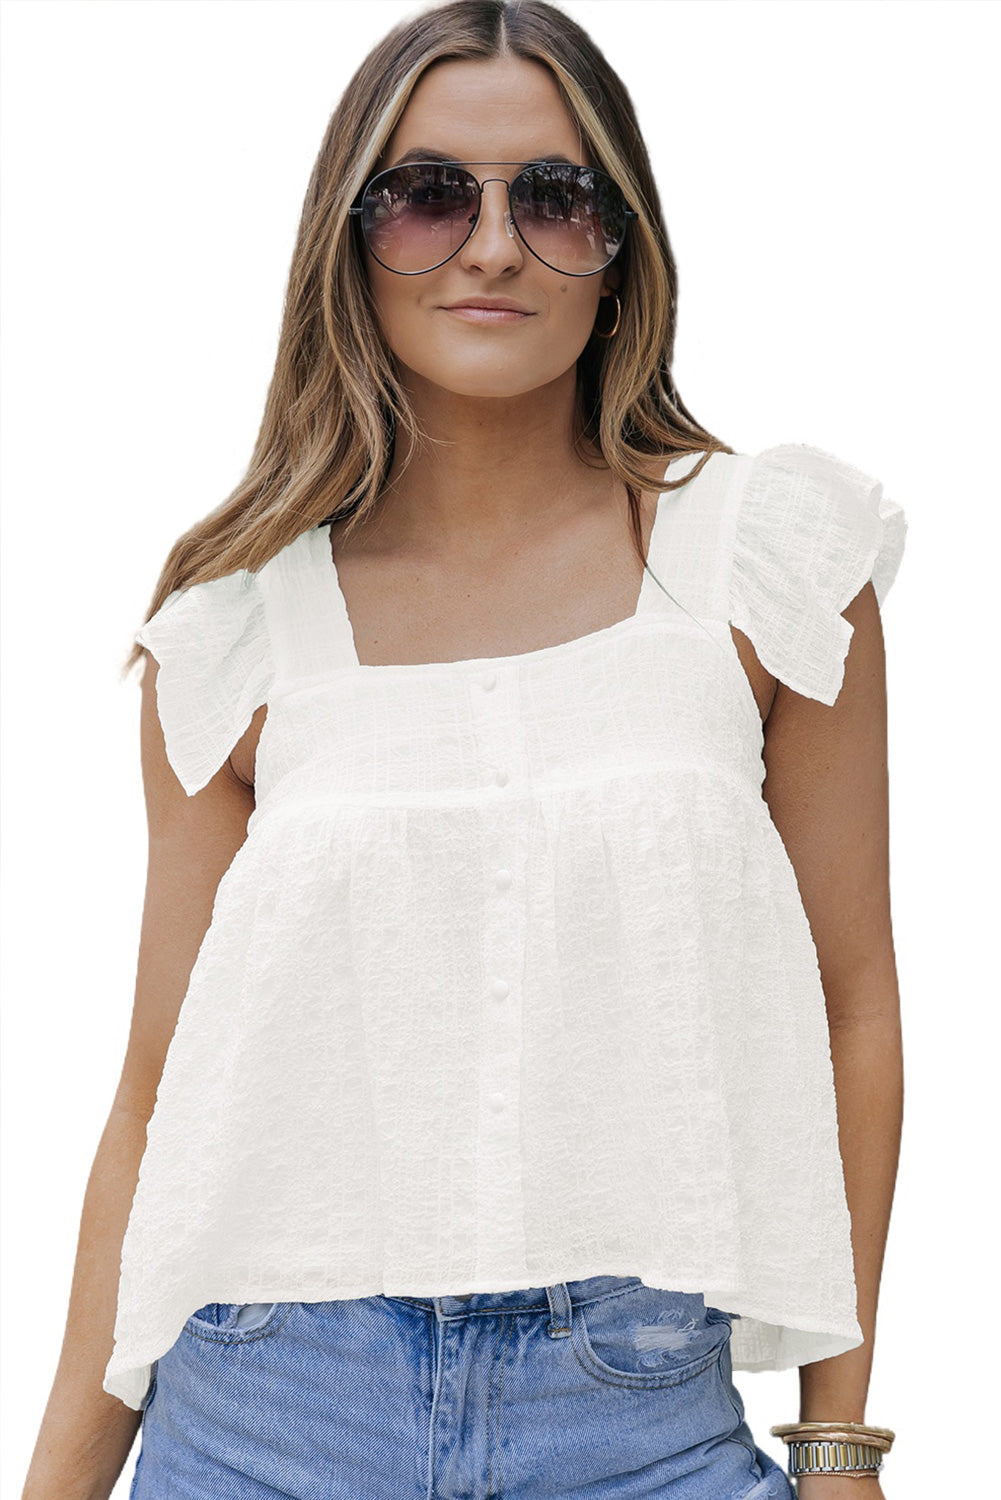 White Square Neck Textured Flowy Tank Top